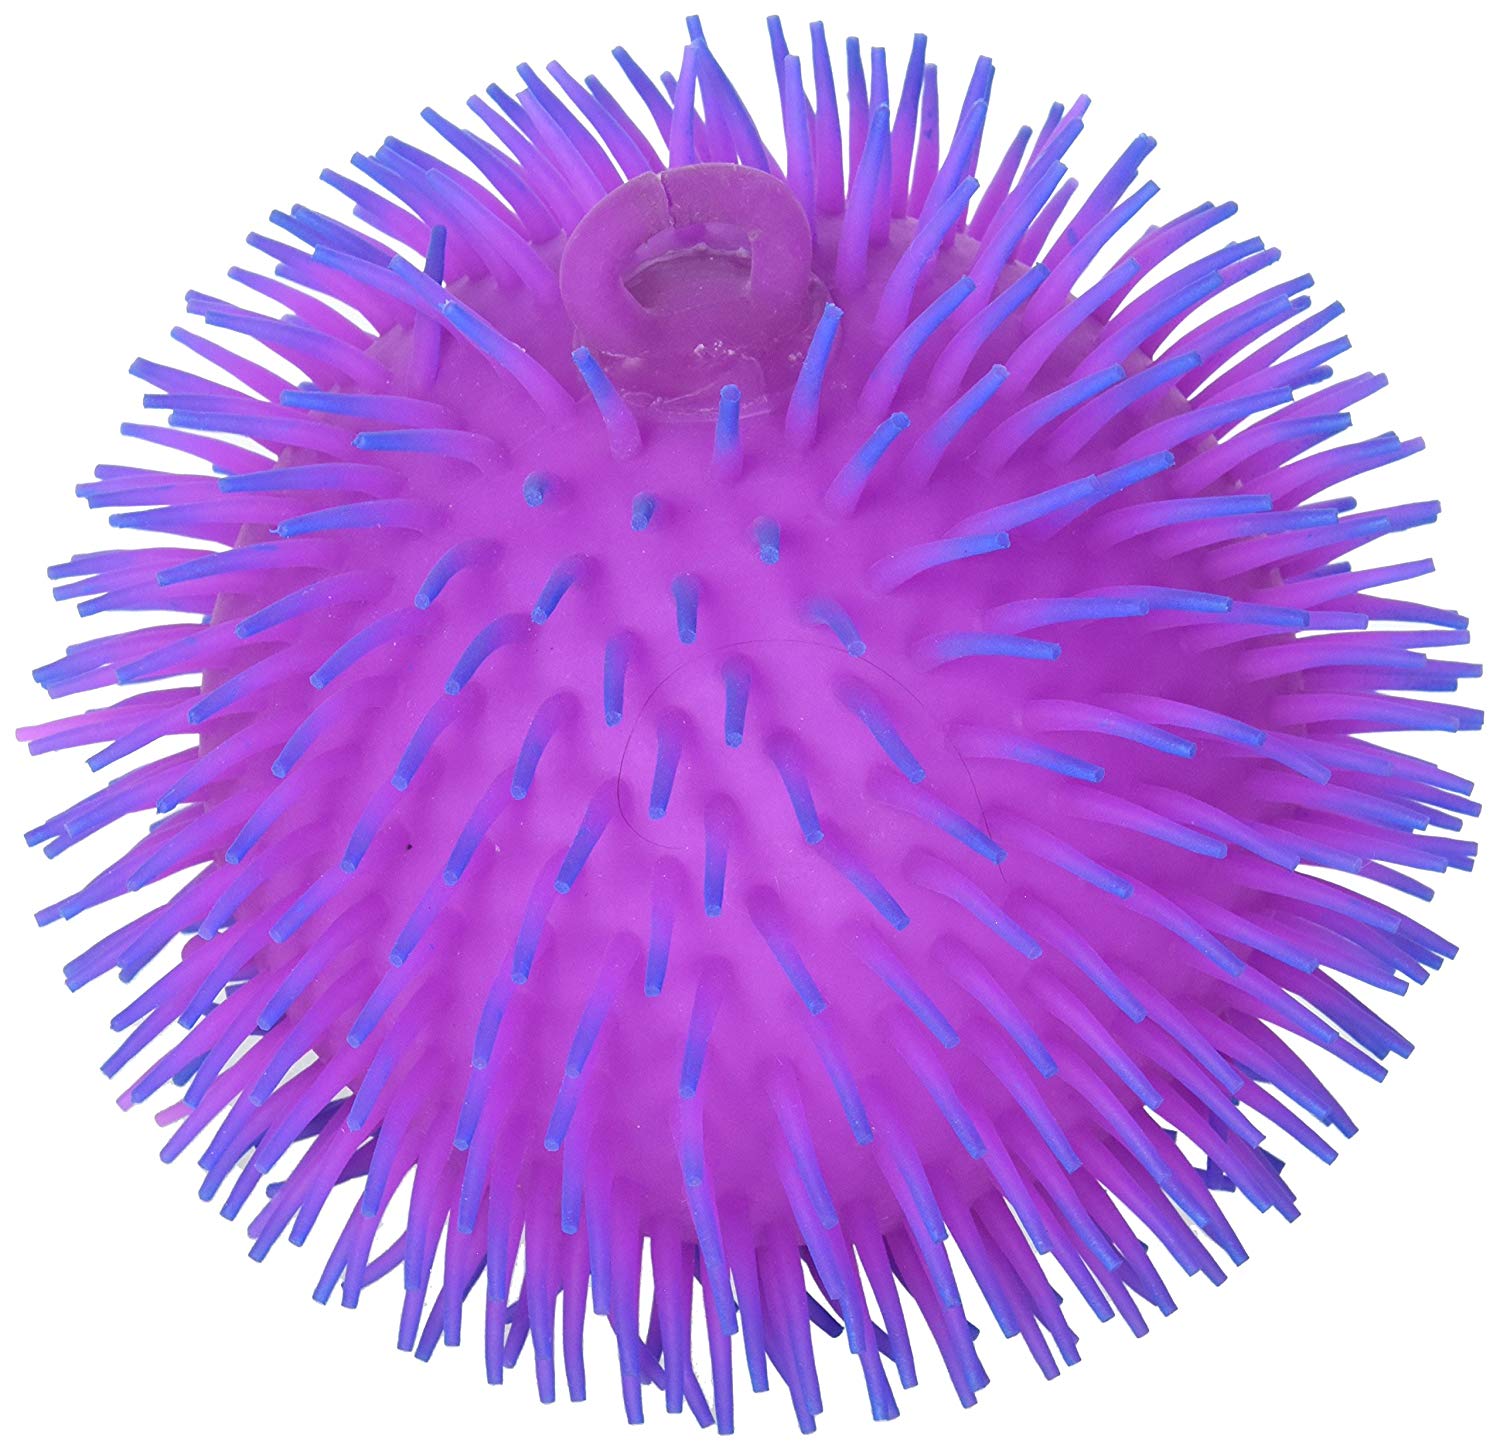 Large Cuddle Ball for Sensory & Special Needs Education Developmental Aid Lilac 